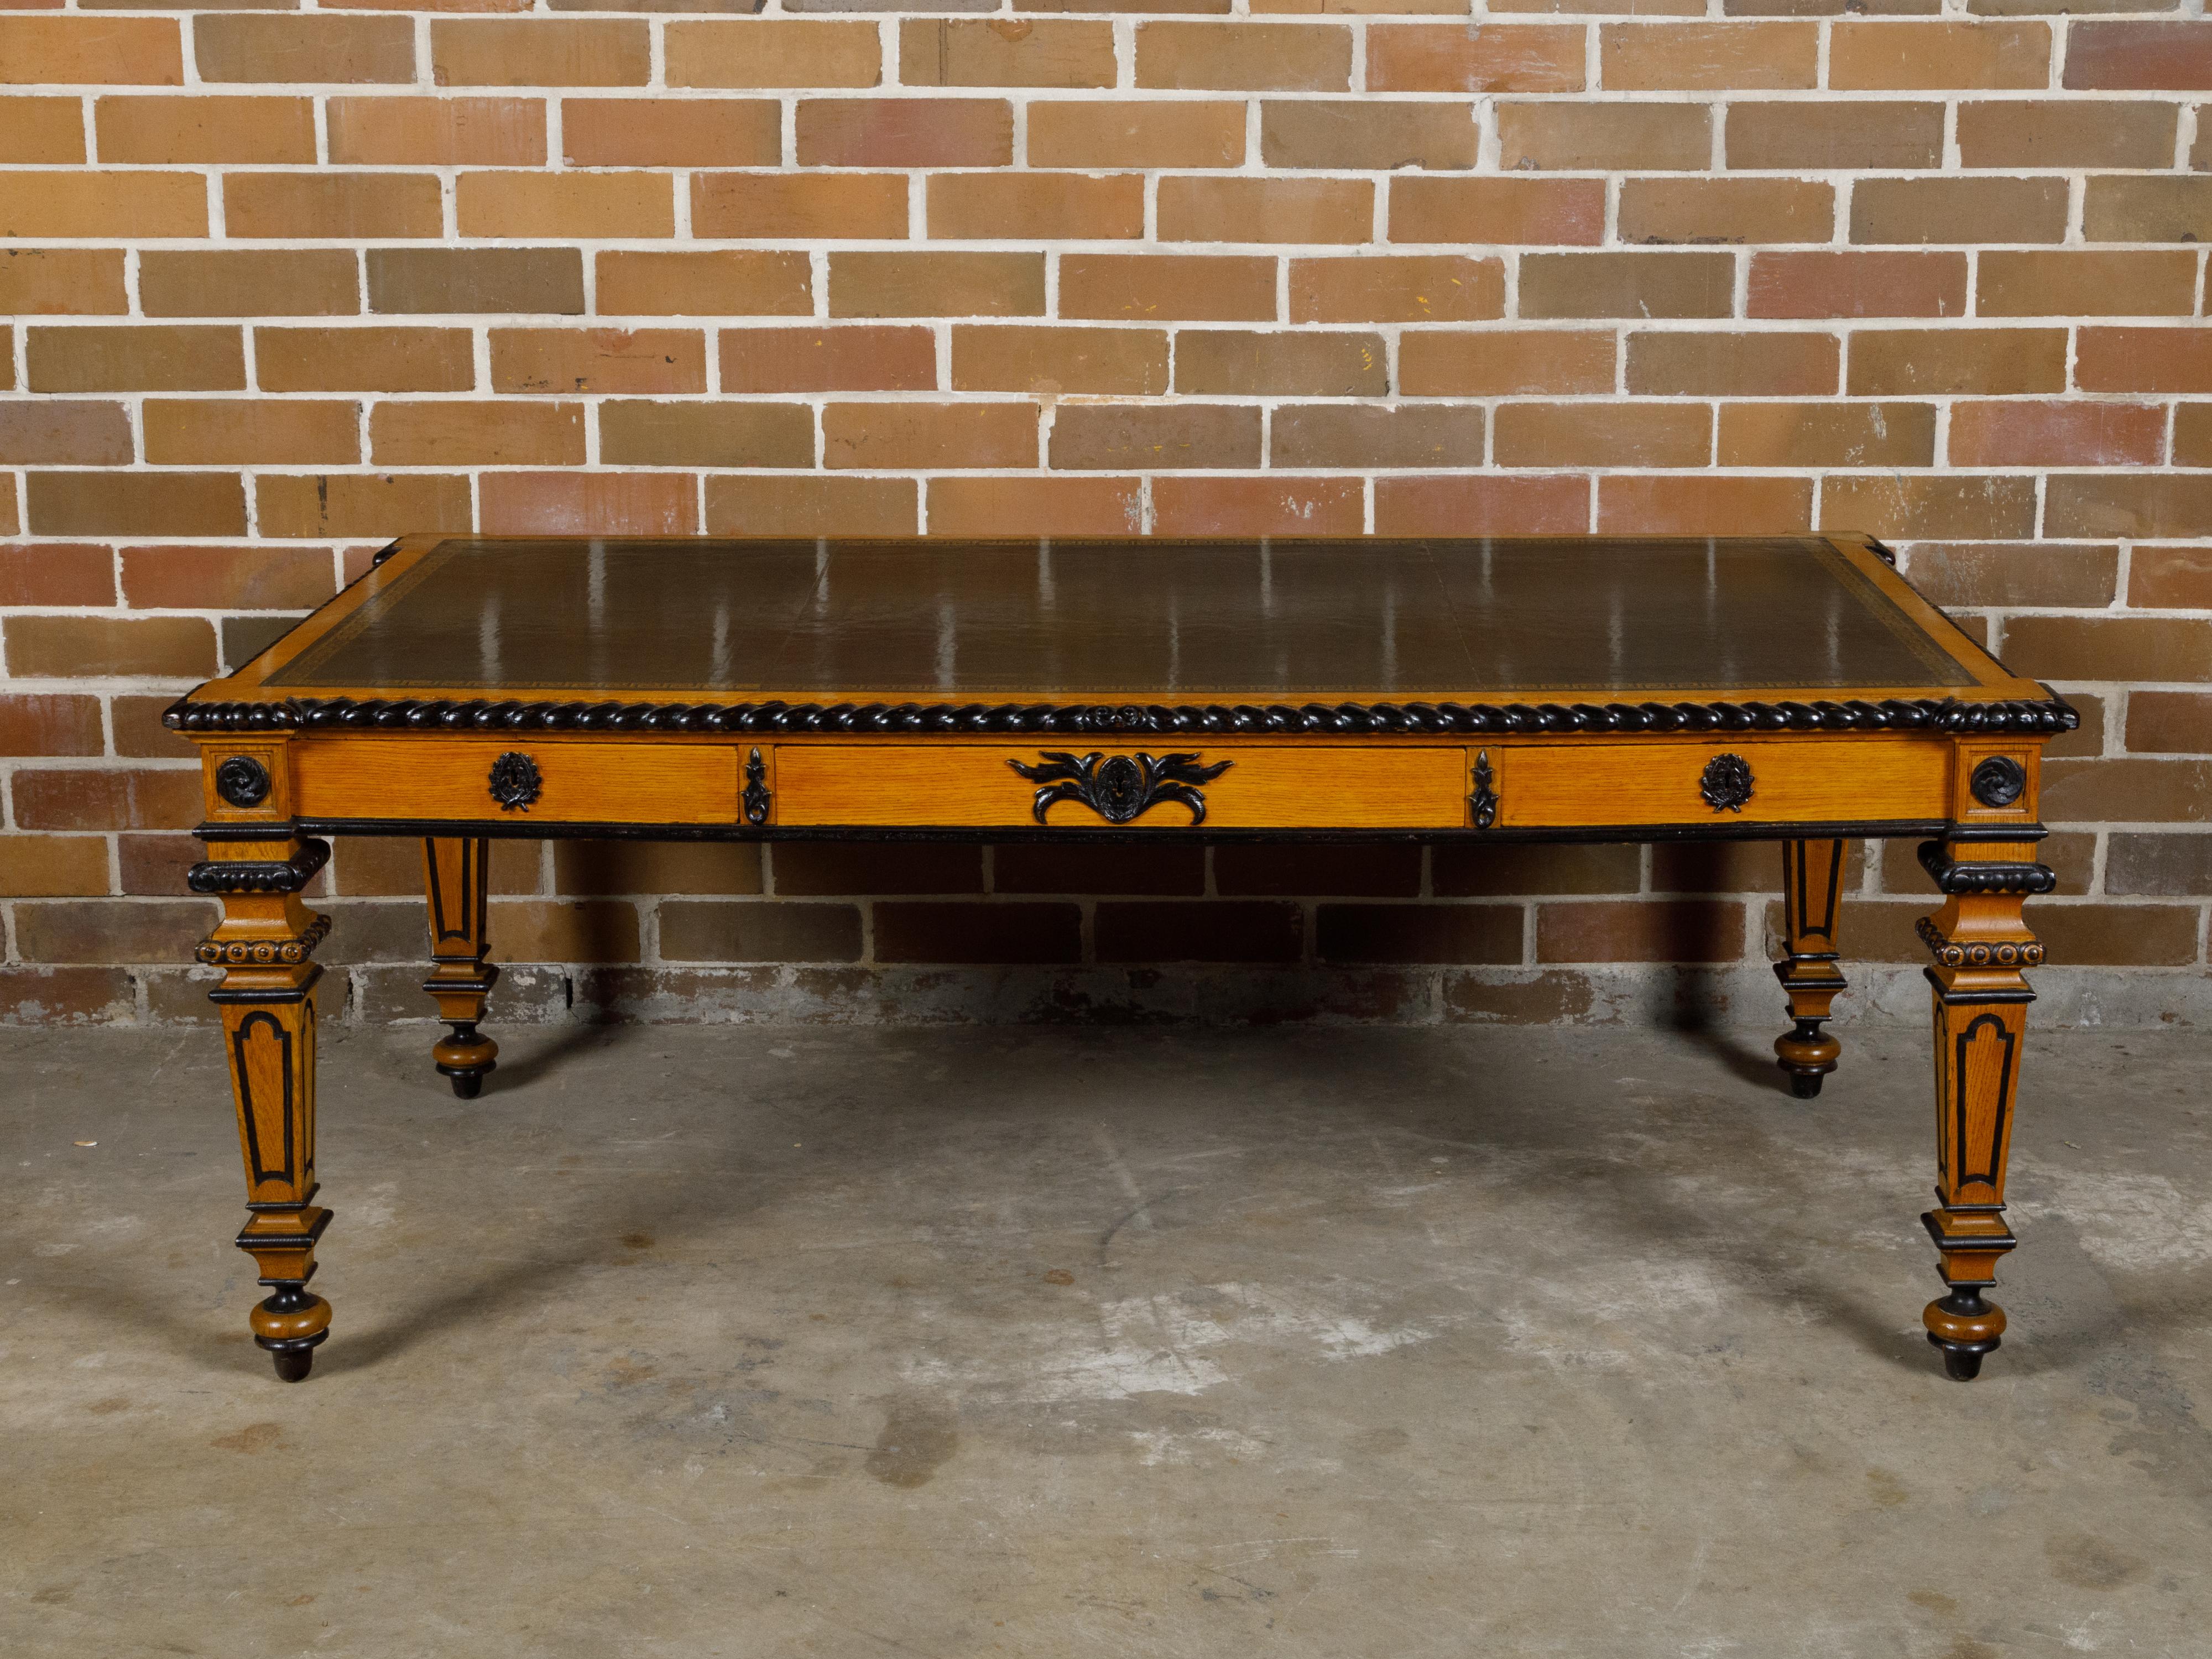 An English oak desk from the 19th century with ebonized accents, carved floral motifs and Greek Key frieze. This 19th-century English oak desk masterfully combines the warmth of oak with the sophistication of ebonized accents, creating a piece that